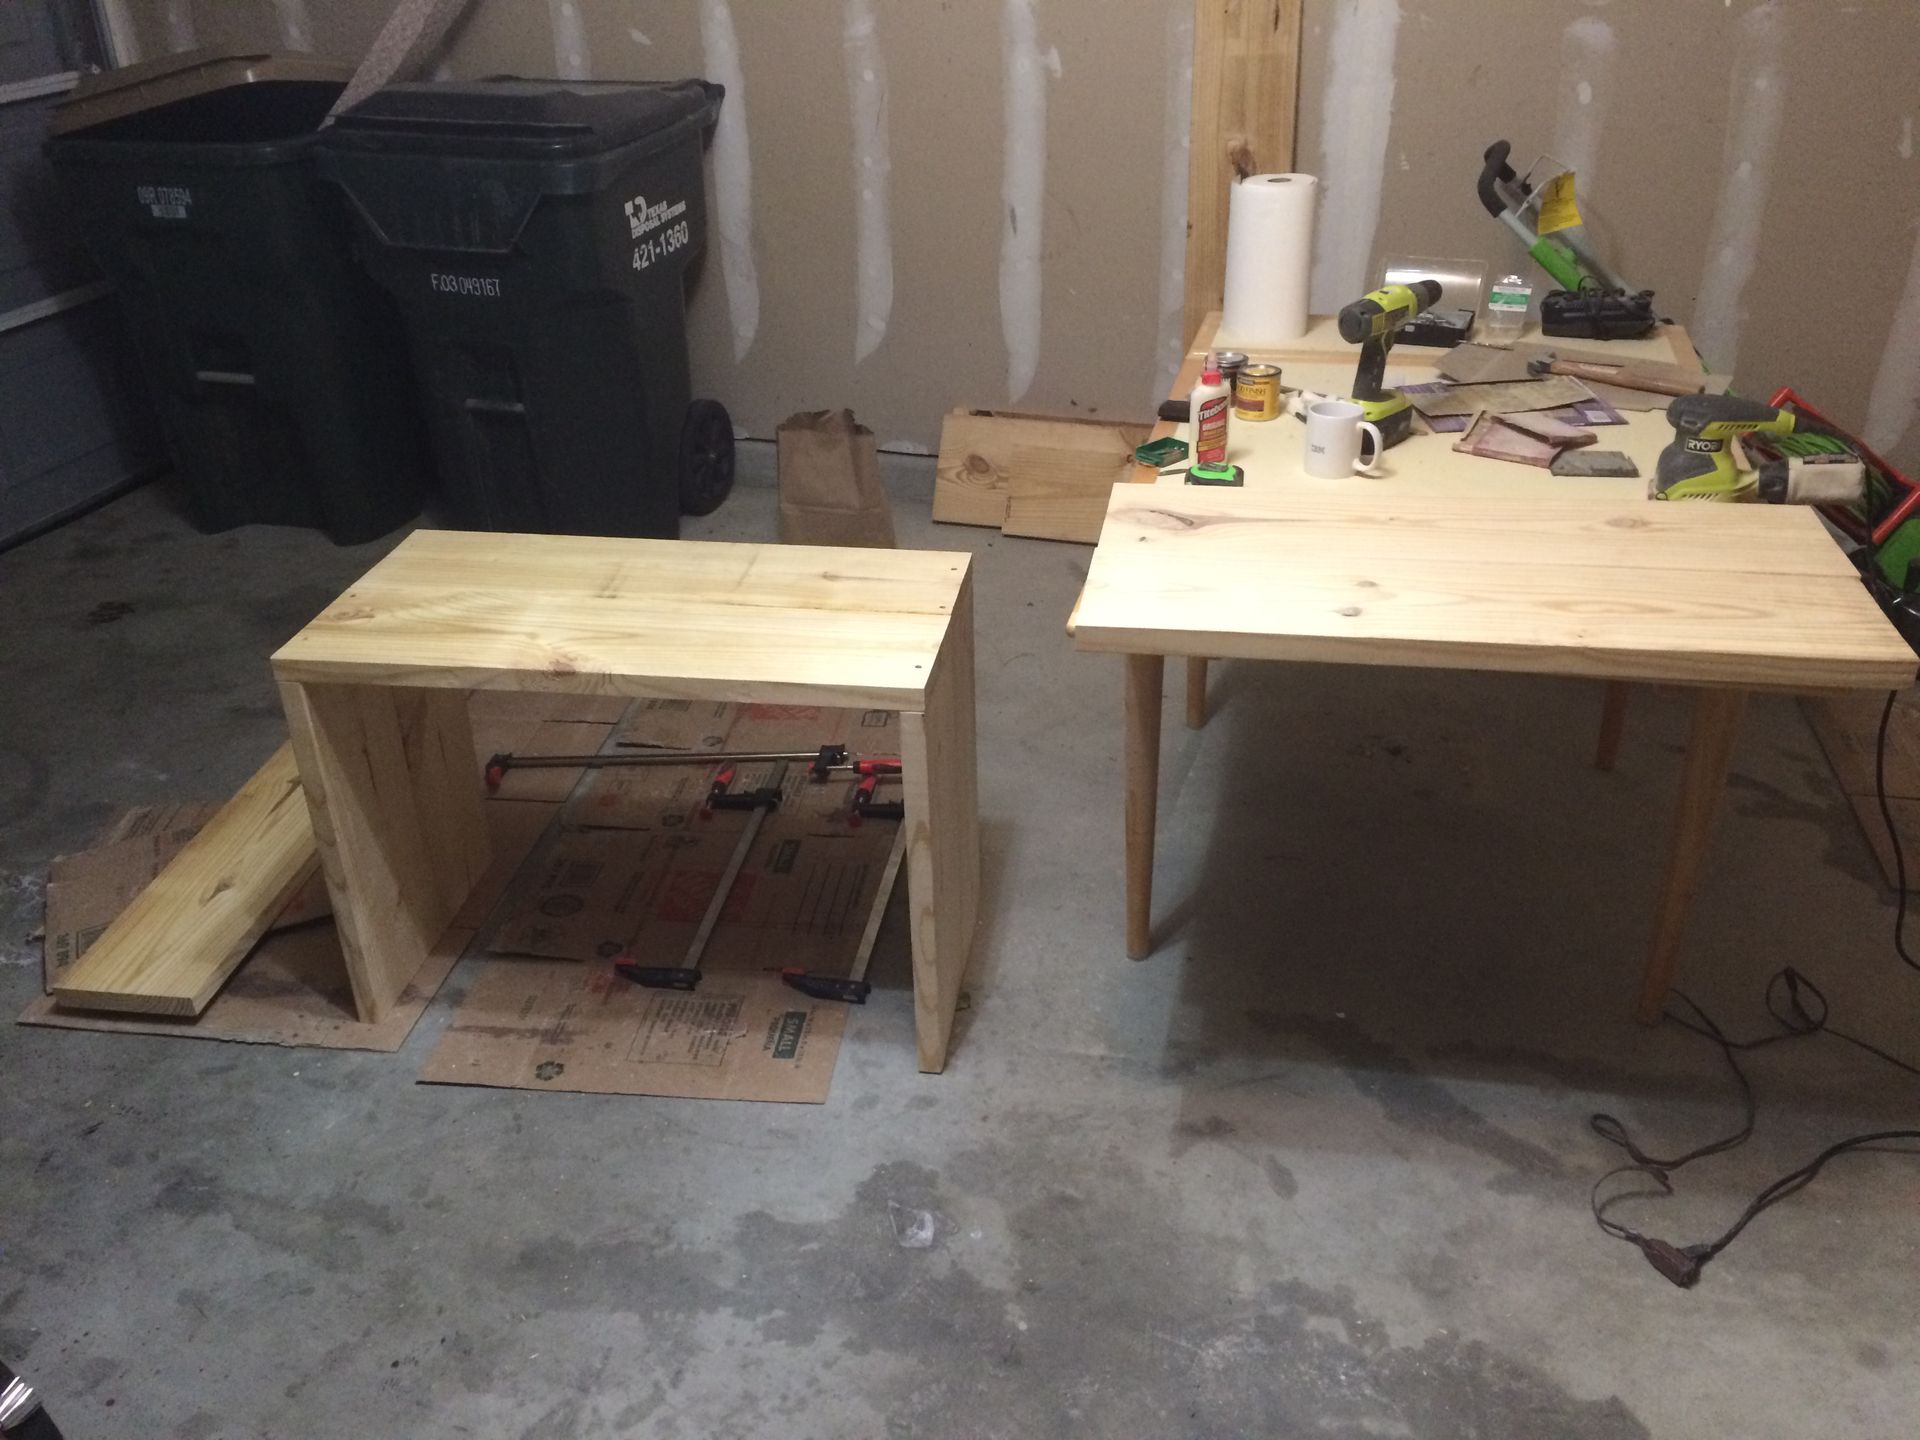 Woodworking, furniture, and stress relief ...